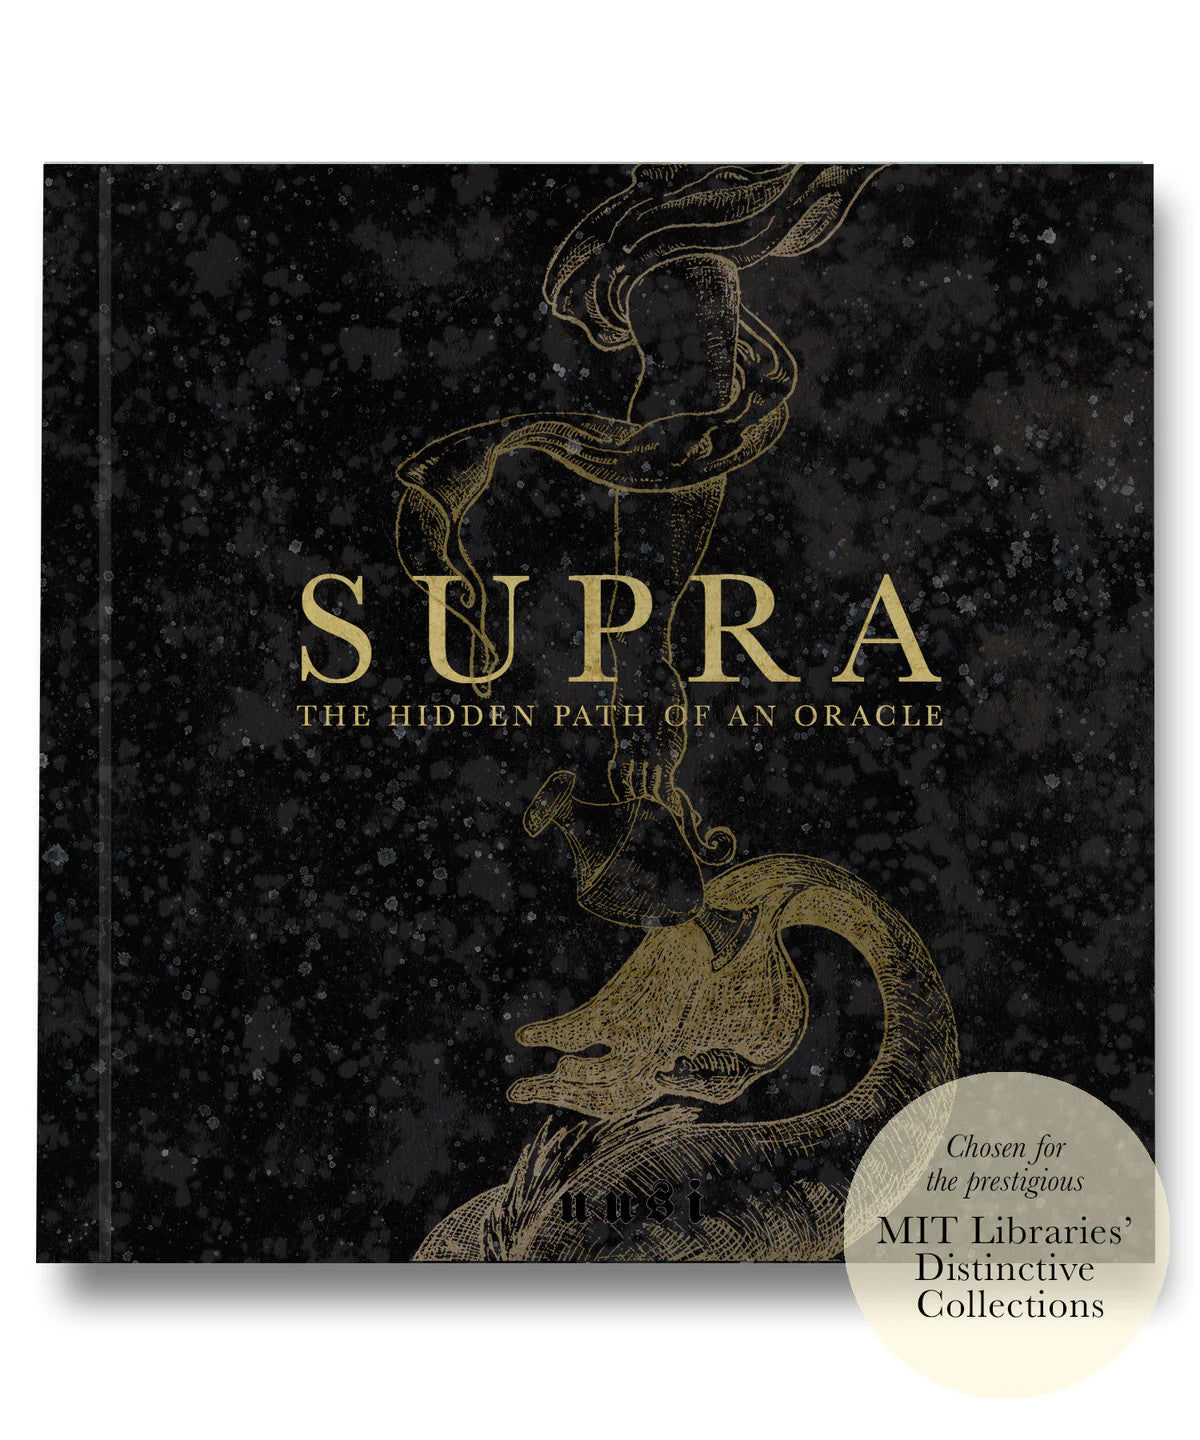 SUPRA: THE HIDDEN PATH OF AN ORACLE